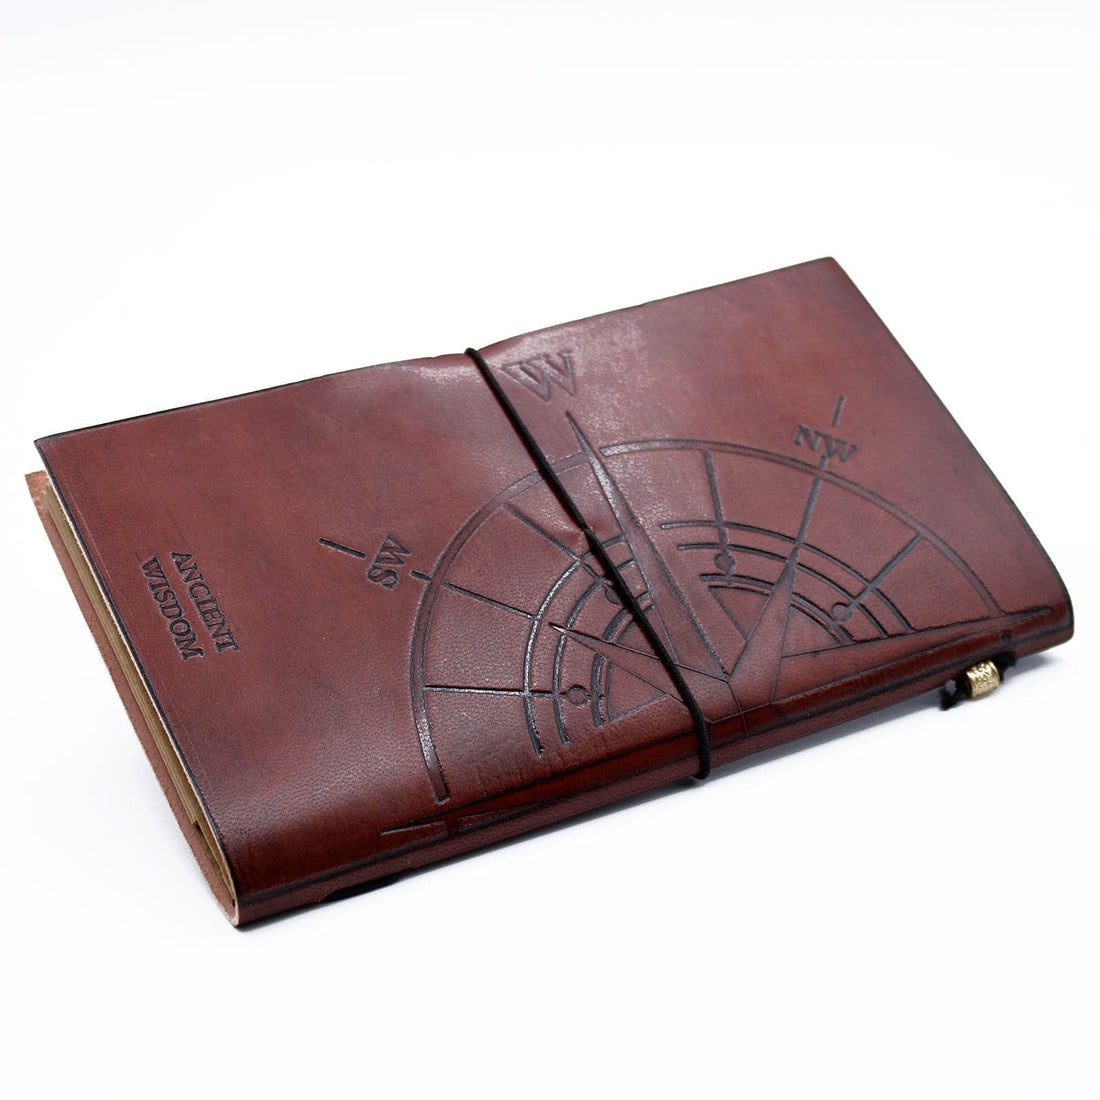 Handmade Leather Journal - Travel the World - Brown (80 pages) - best price from Maltashopper.com MSJ-10